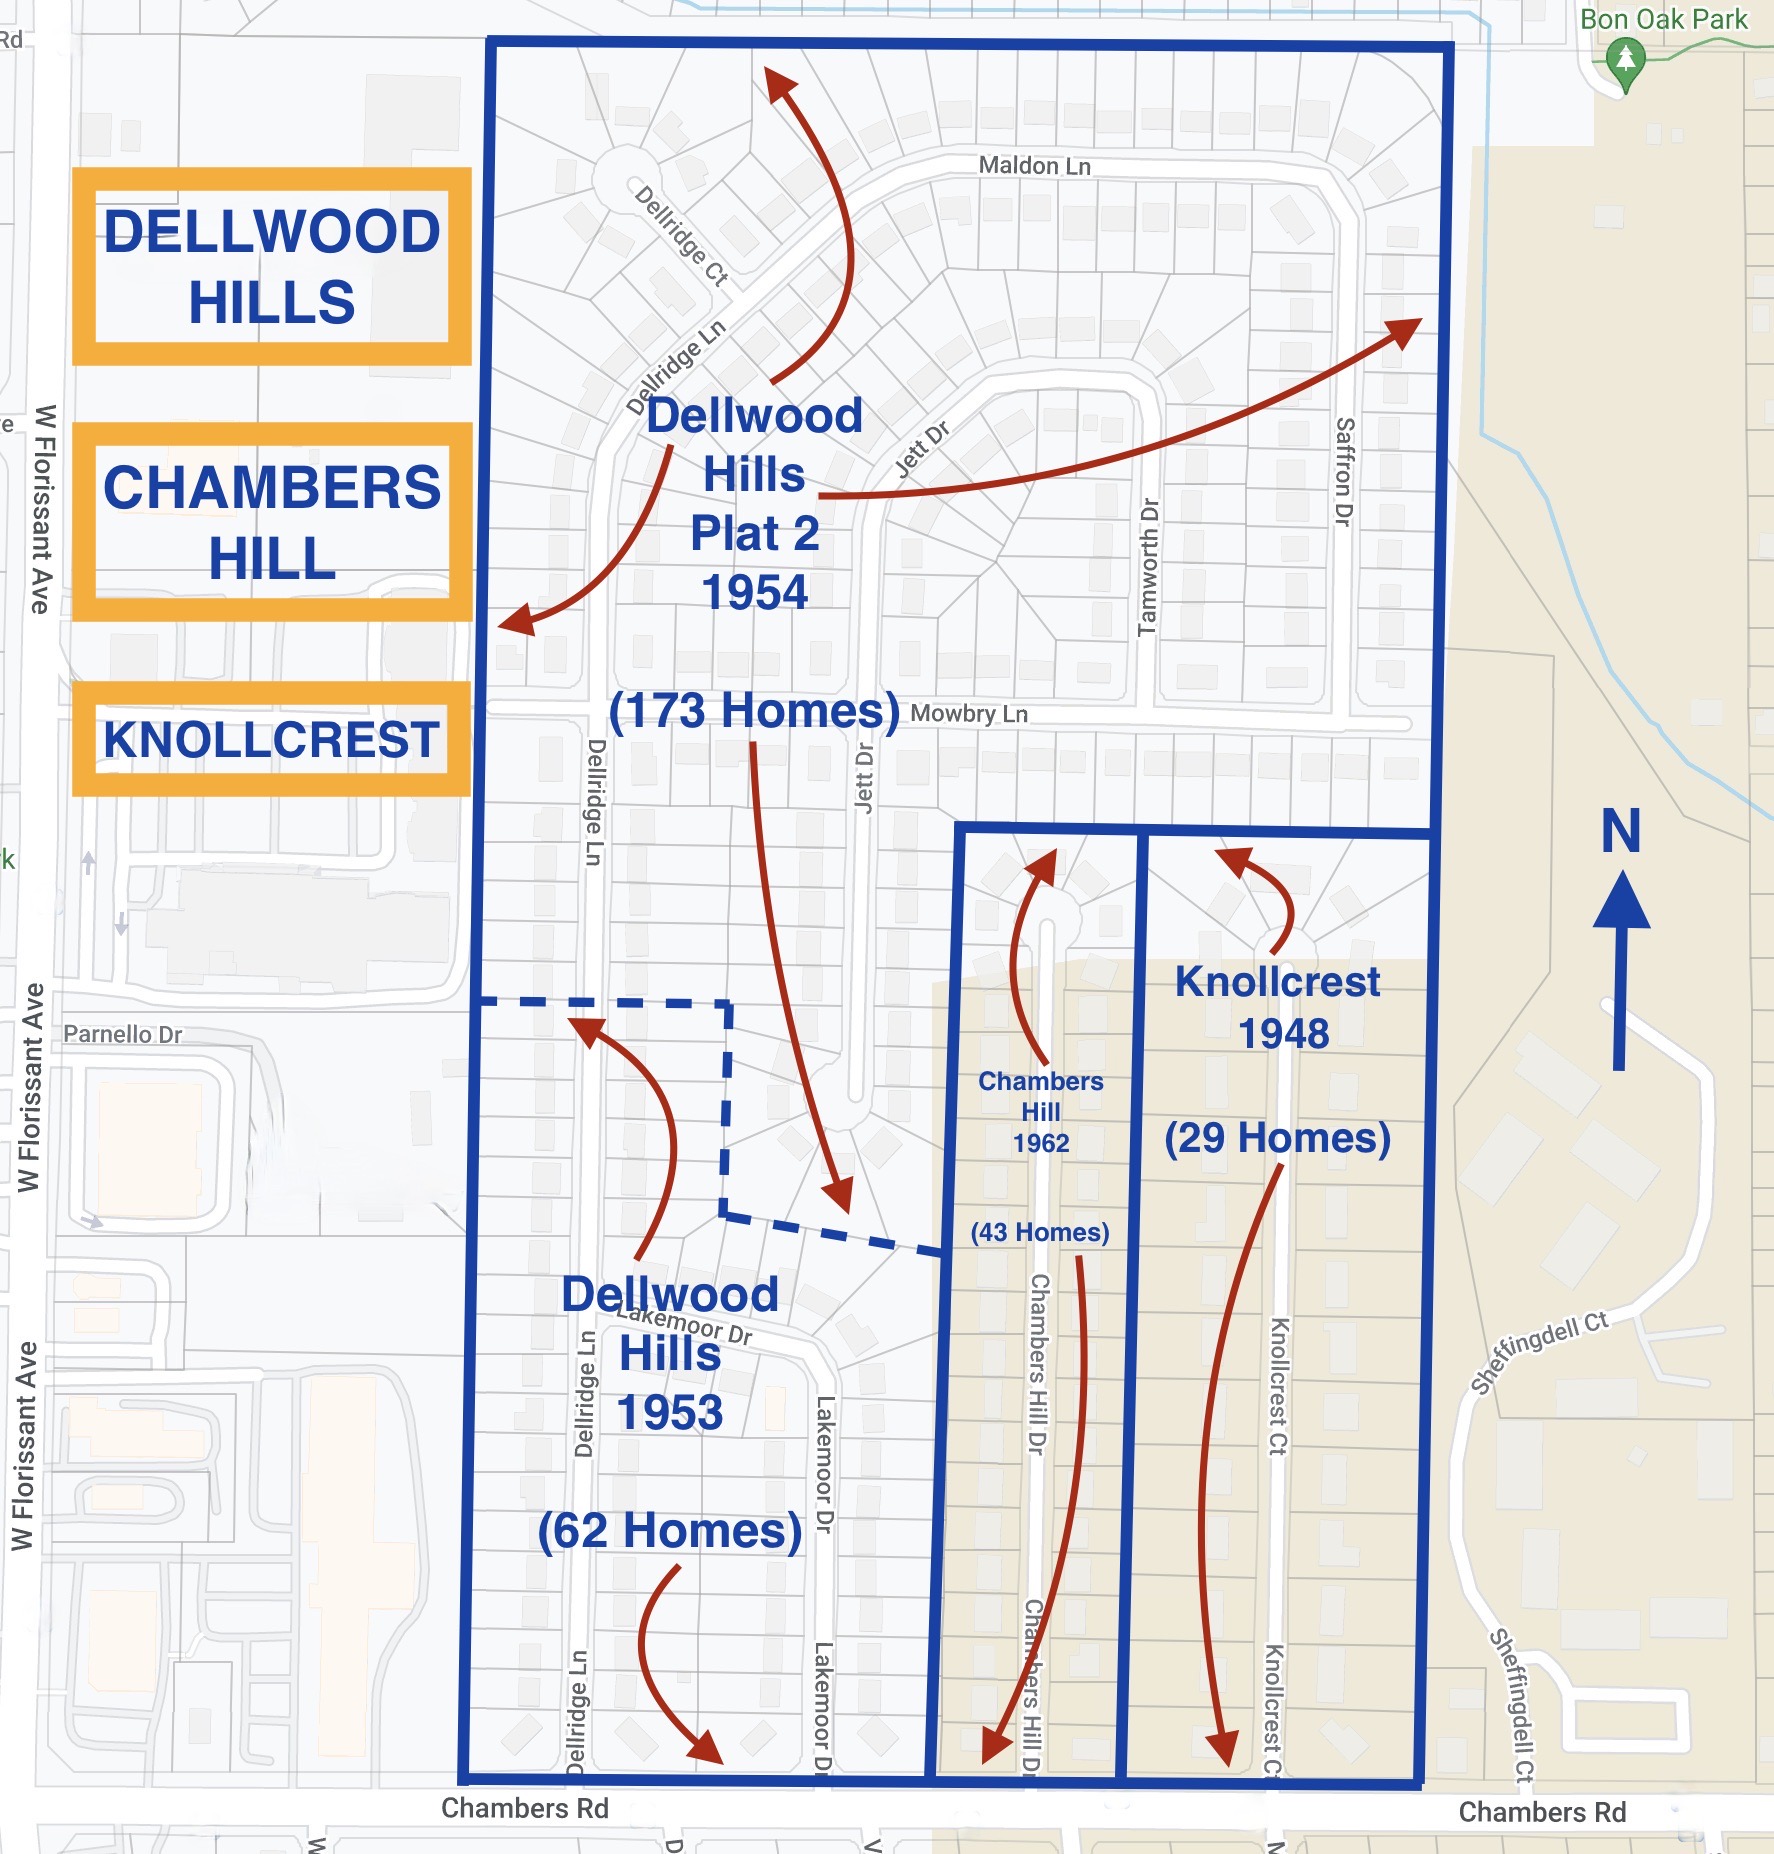 KNOLLCREST, CHAMBERS HILL AND DELLWOOD HILLS SUBDIVISIONS MAP